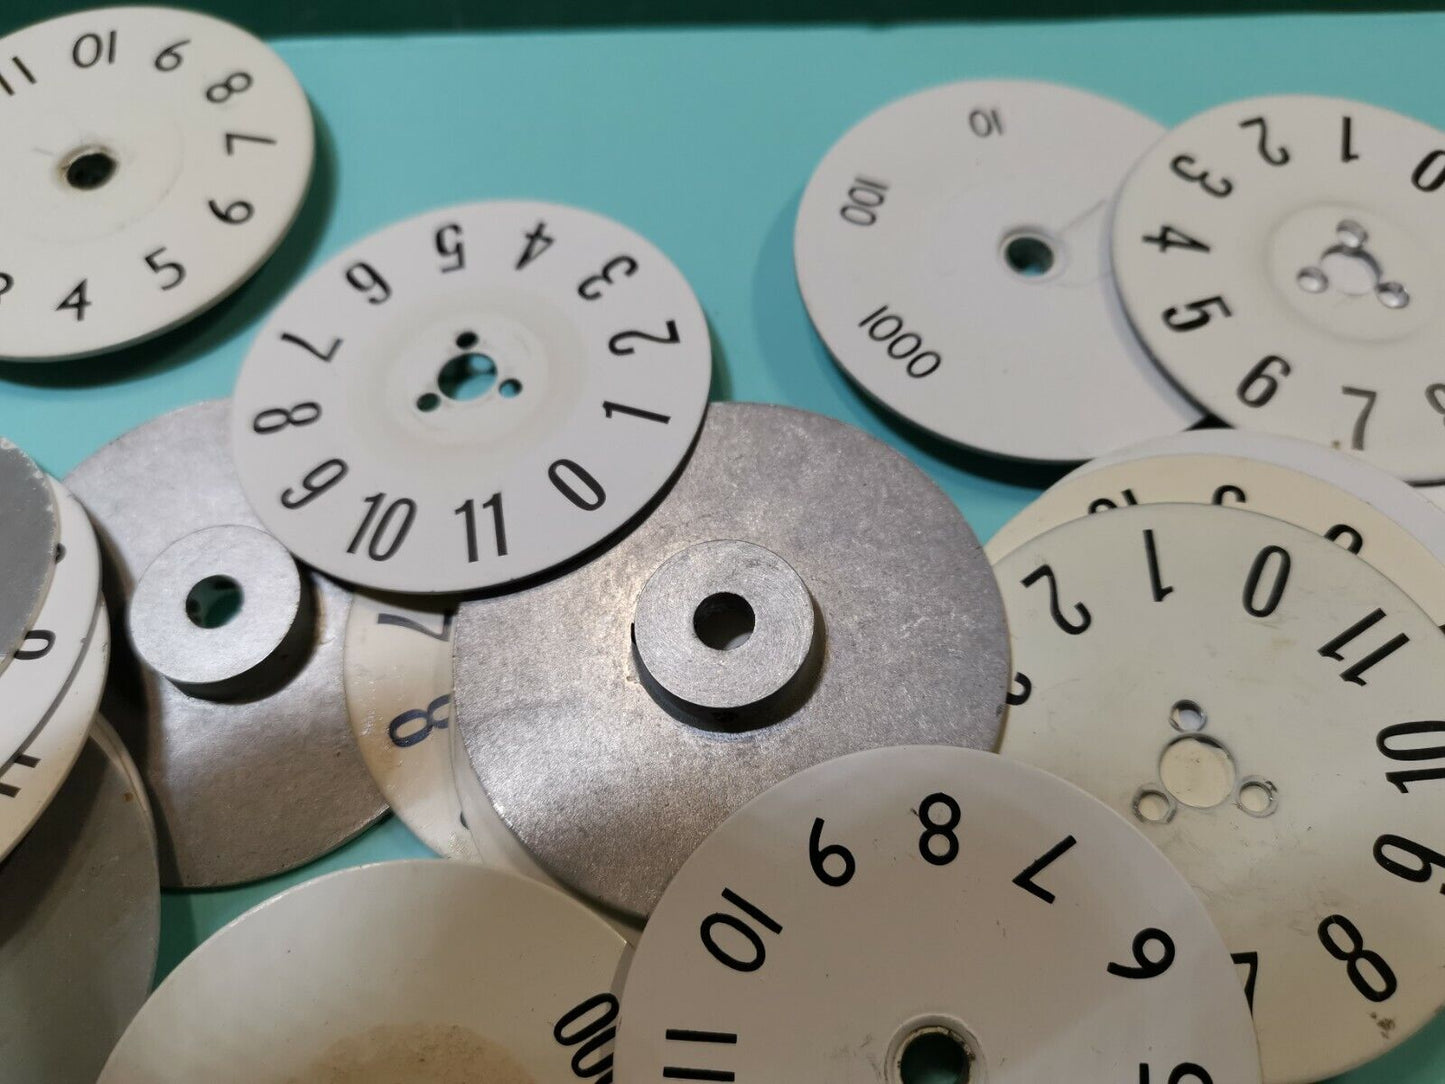 Number Counting Dial For Potentiometer Rotary Switch Joblot